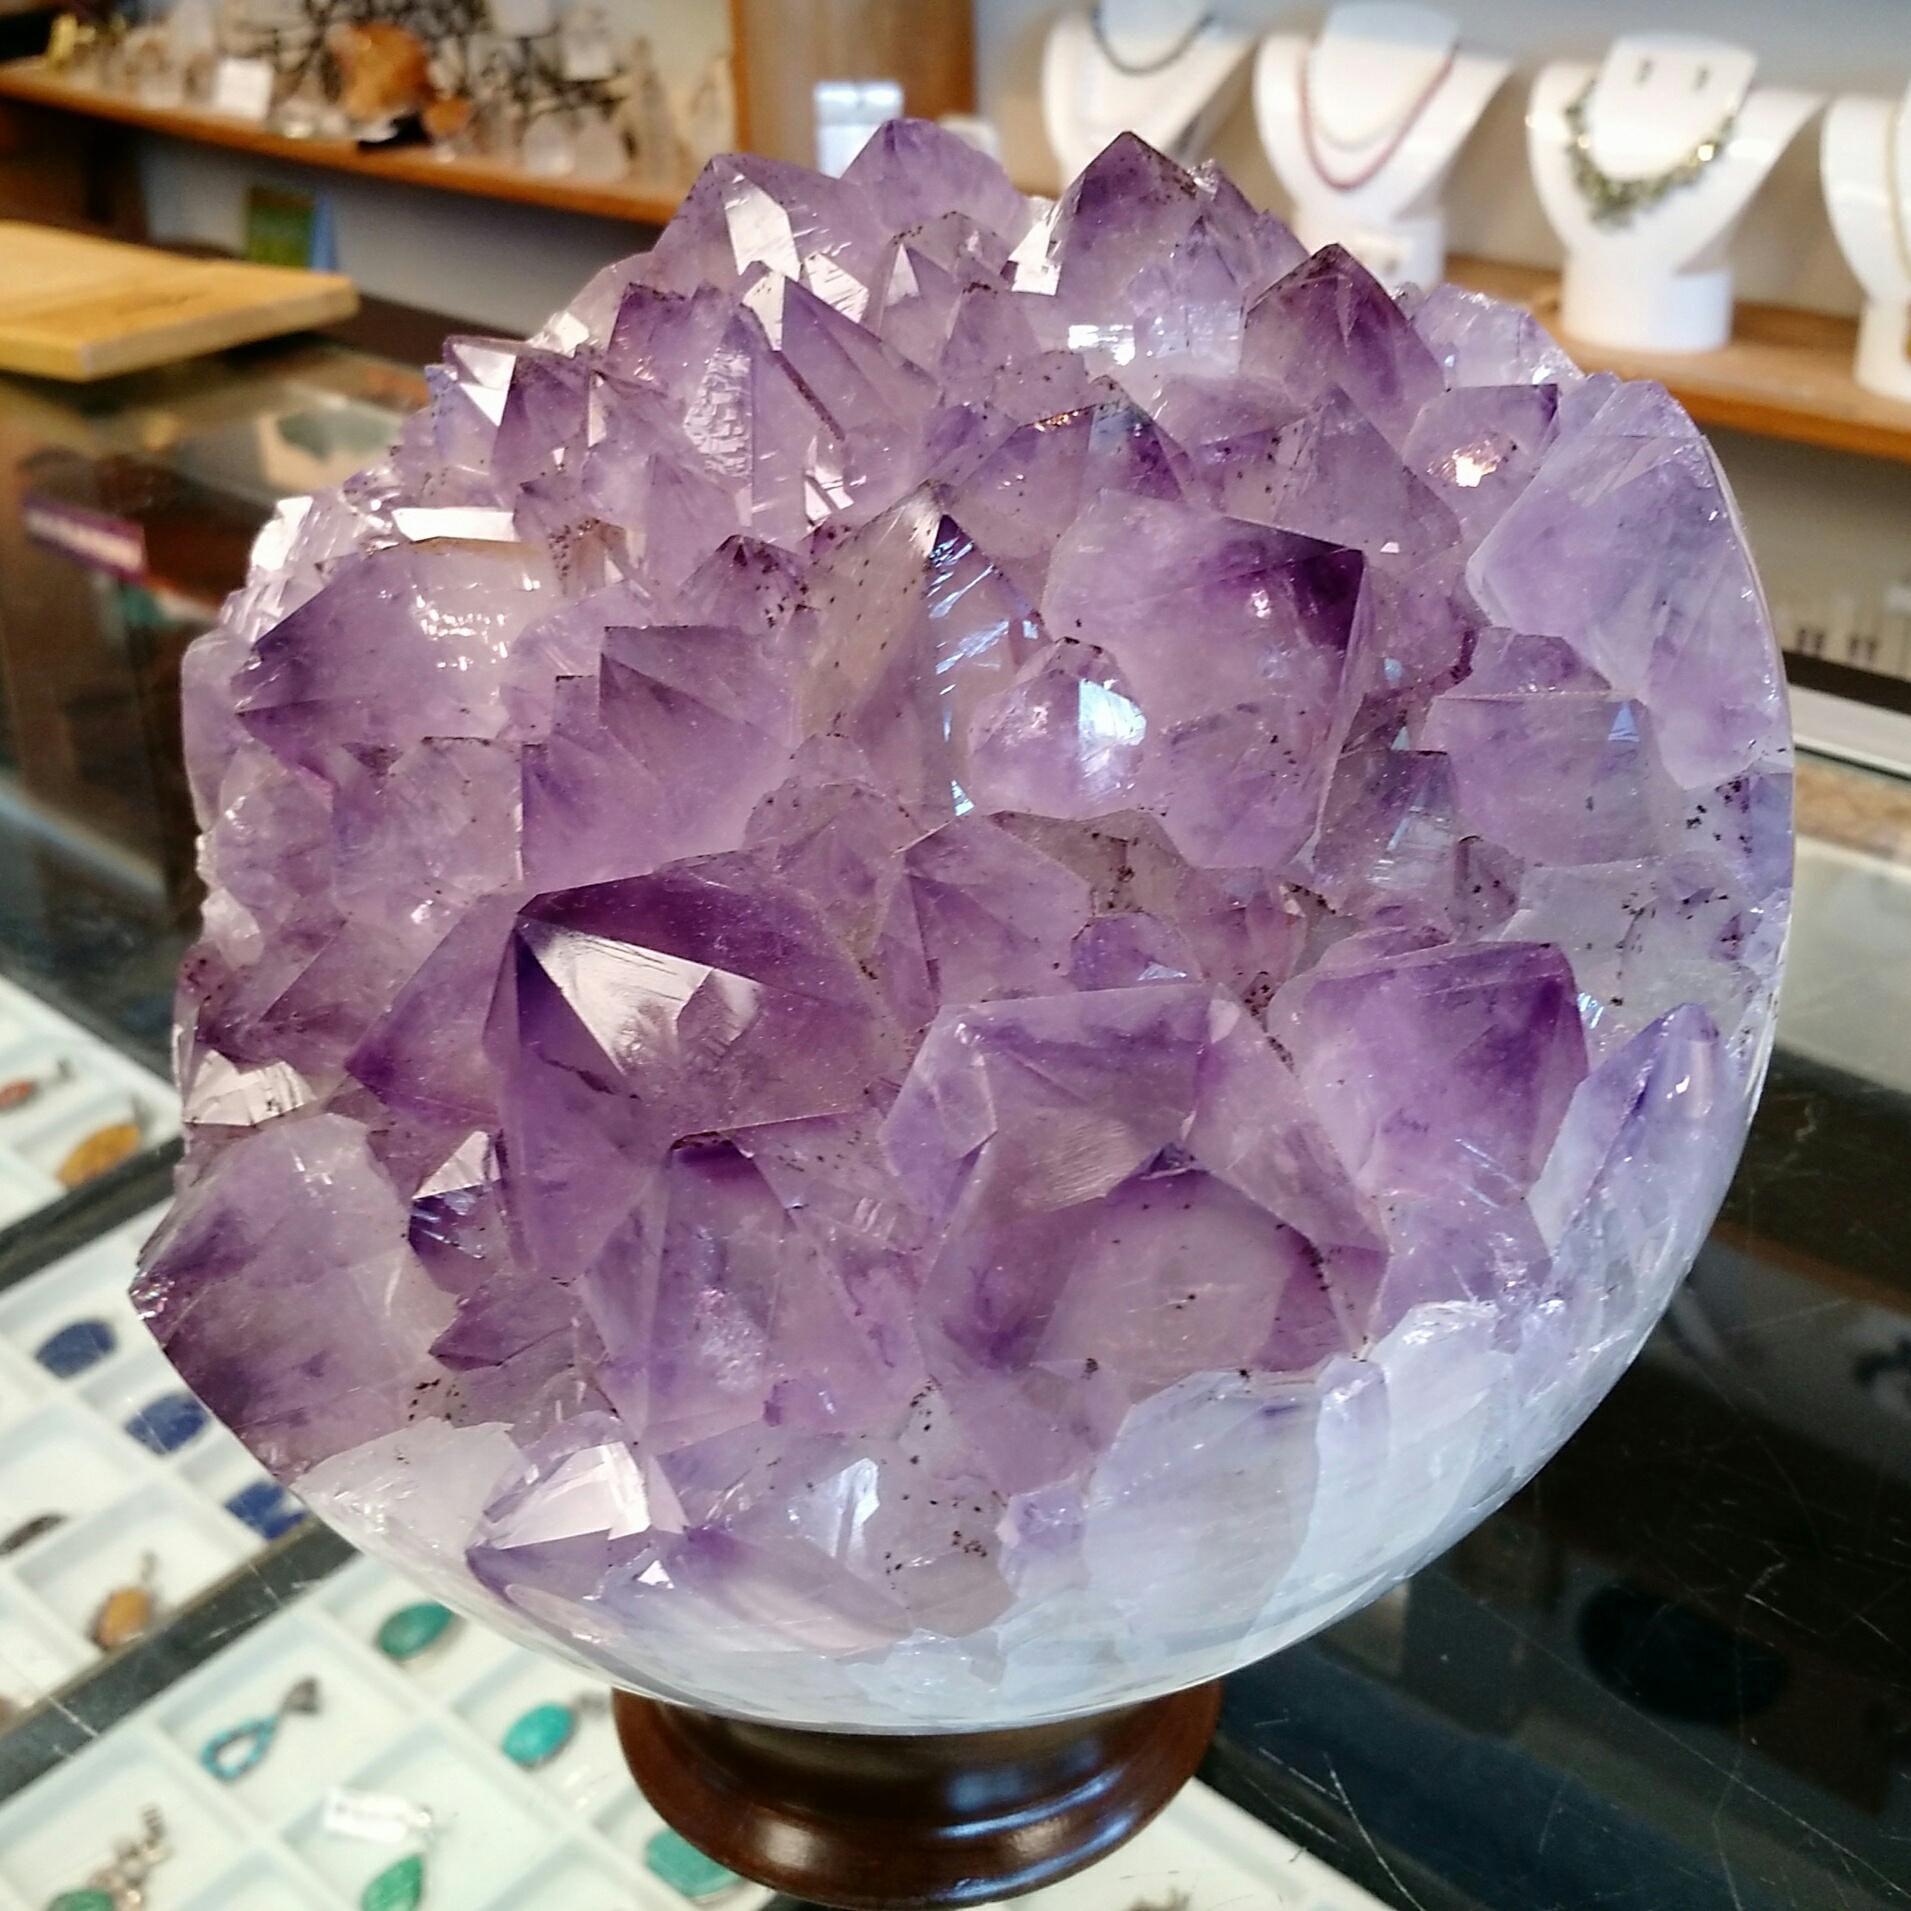 Crystal Cave Rock & Gem Shop Coupons near me in Davie ...